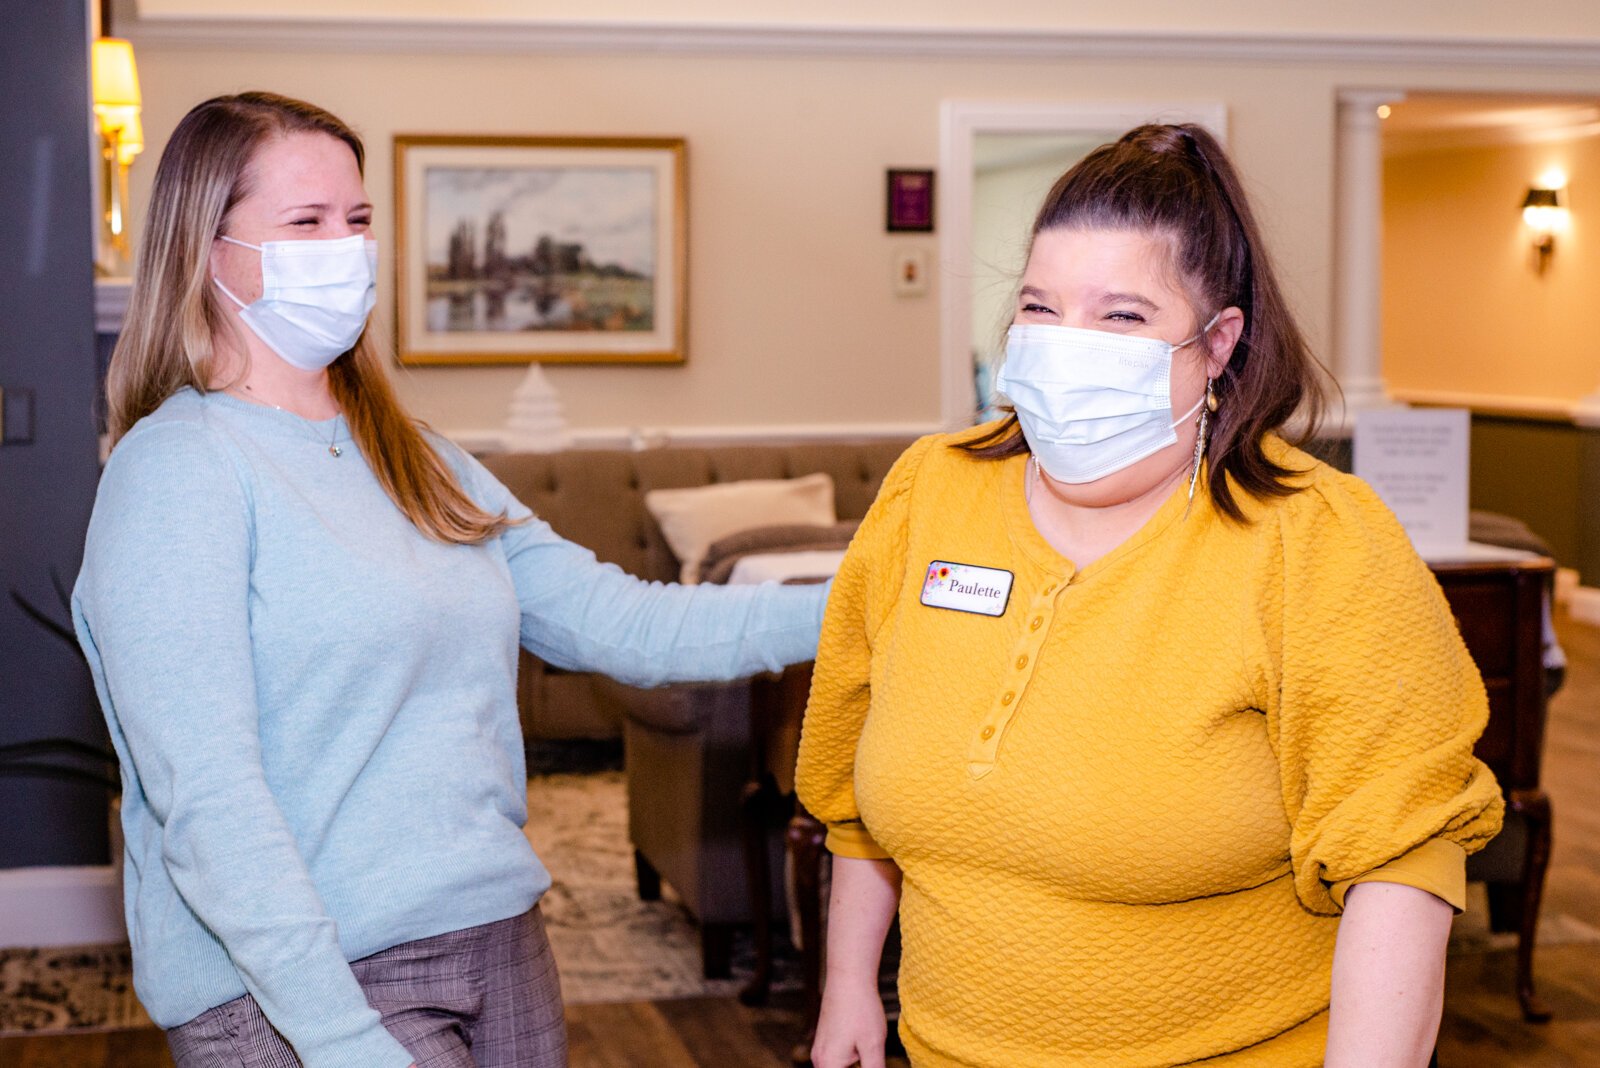 Ashley Jamieson, a nursing director, with and Paulette Sweet at senior living community Friendship Village near Kalamazoo, Michigan, where they maintain a ratio of 1 nurse to 10 residents, around the clock, to keep staff from becoming overwhelmed.